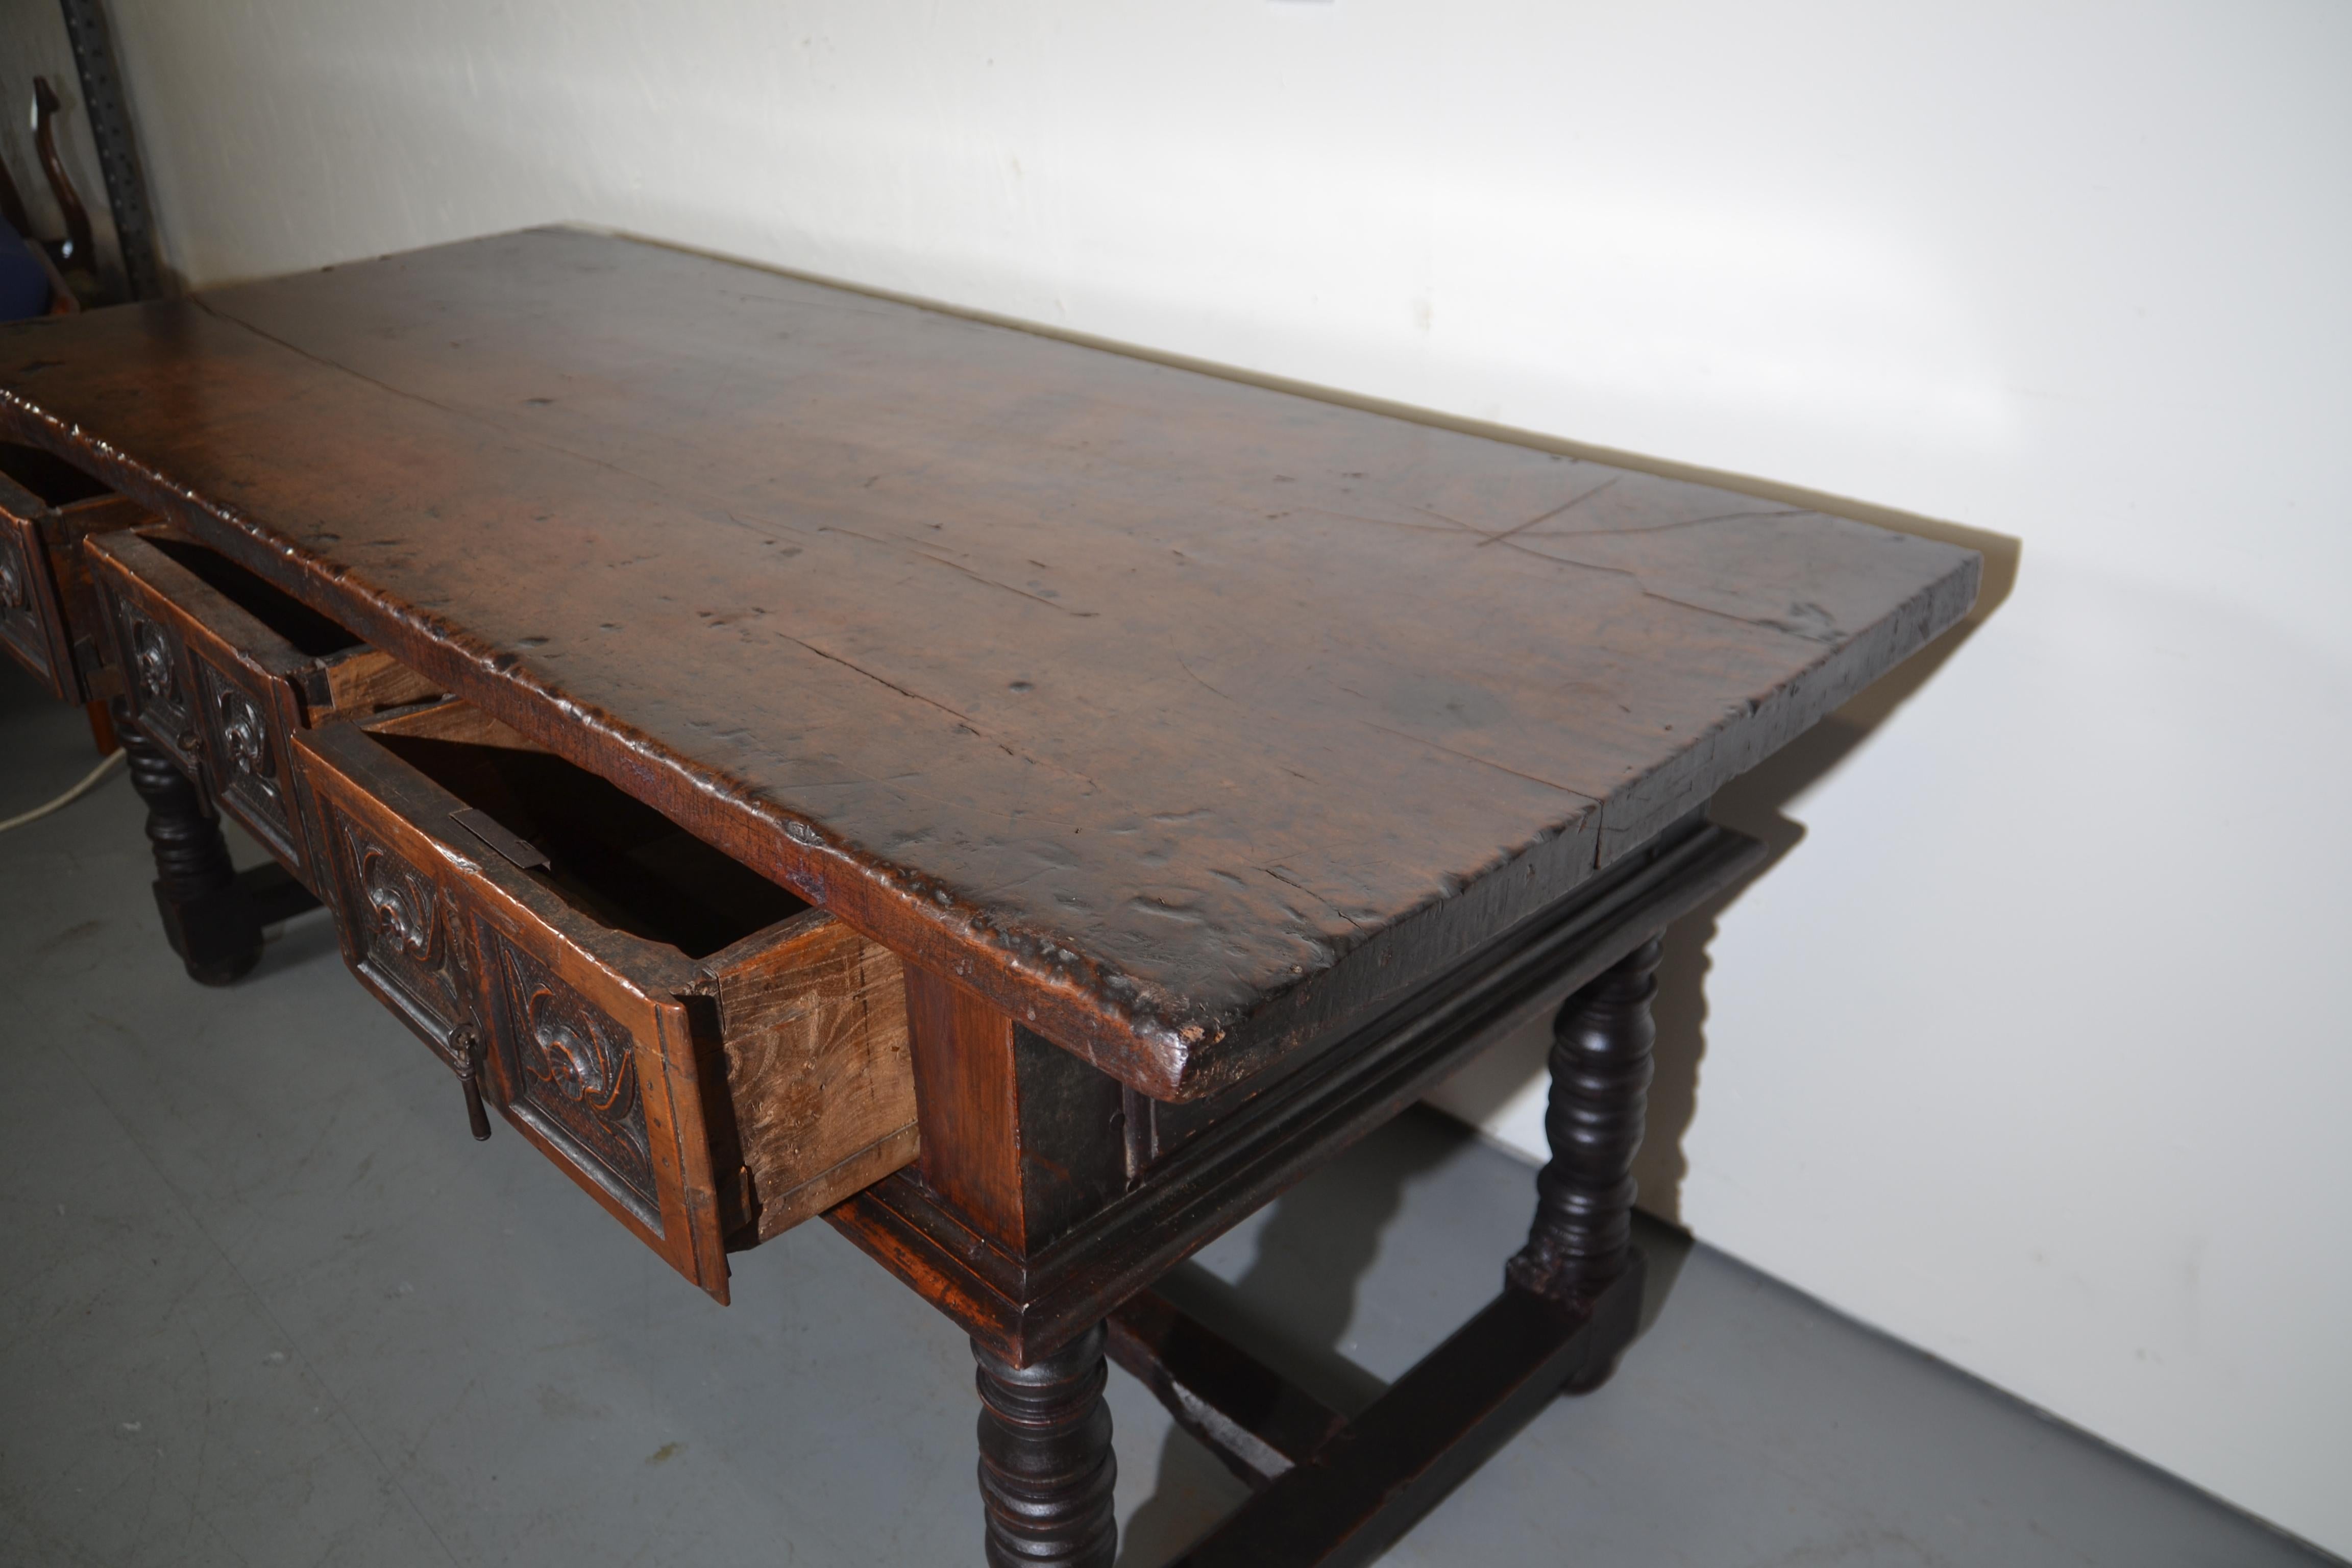 A superb 17th century Spanish multi-use Table. c.1680 Turned legs and a thick top with nice patina. There are 3 drawers to the front with carvings and old hardware. This table will not disappoint.